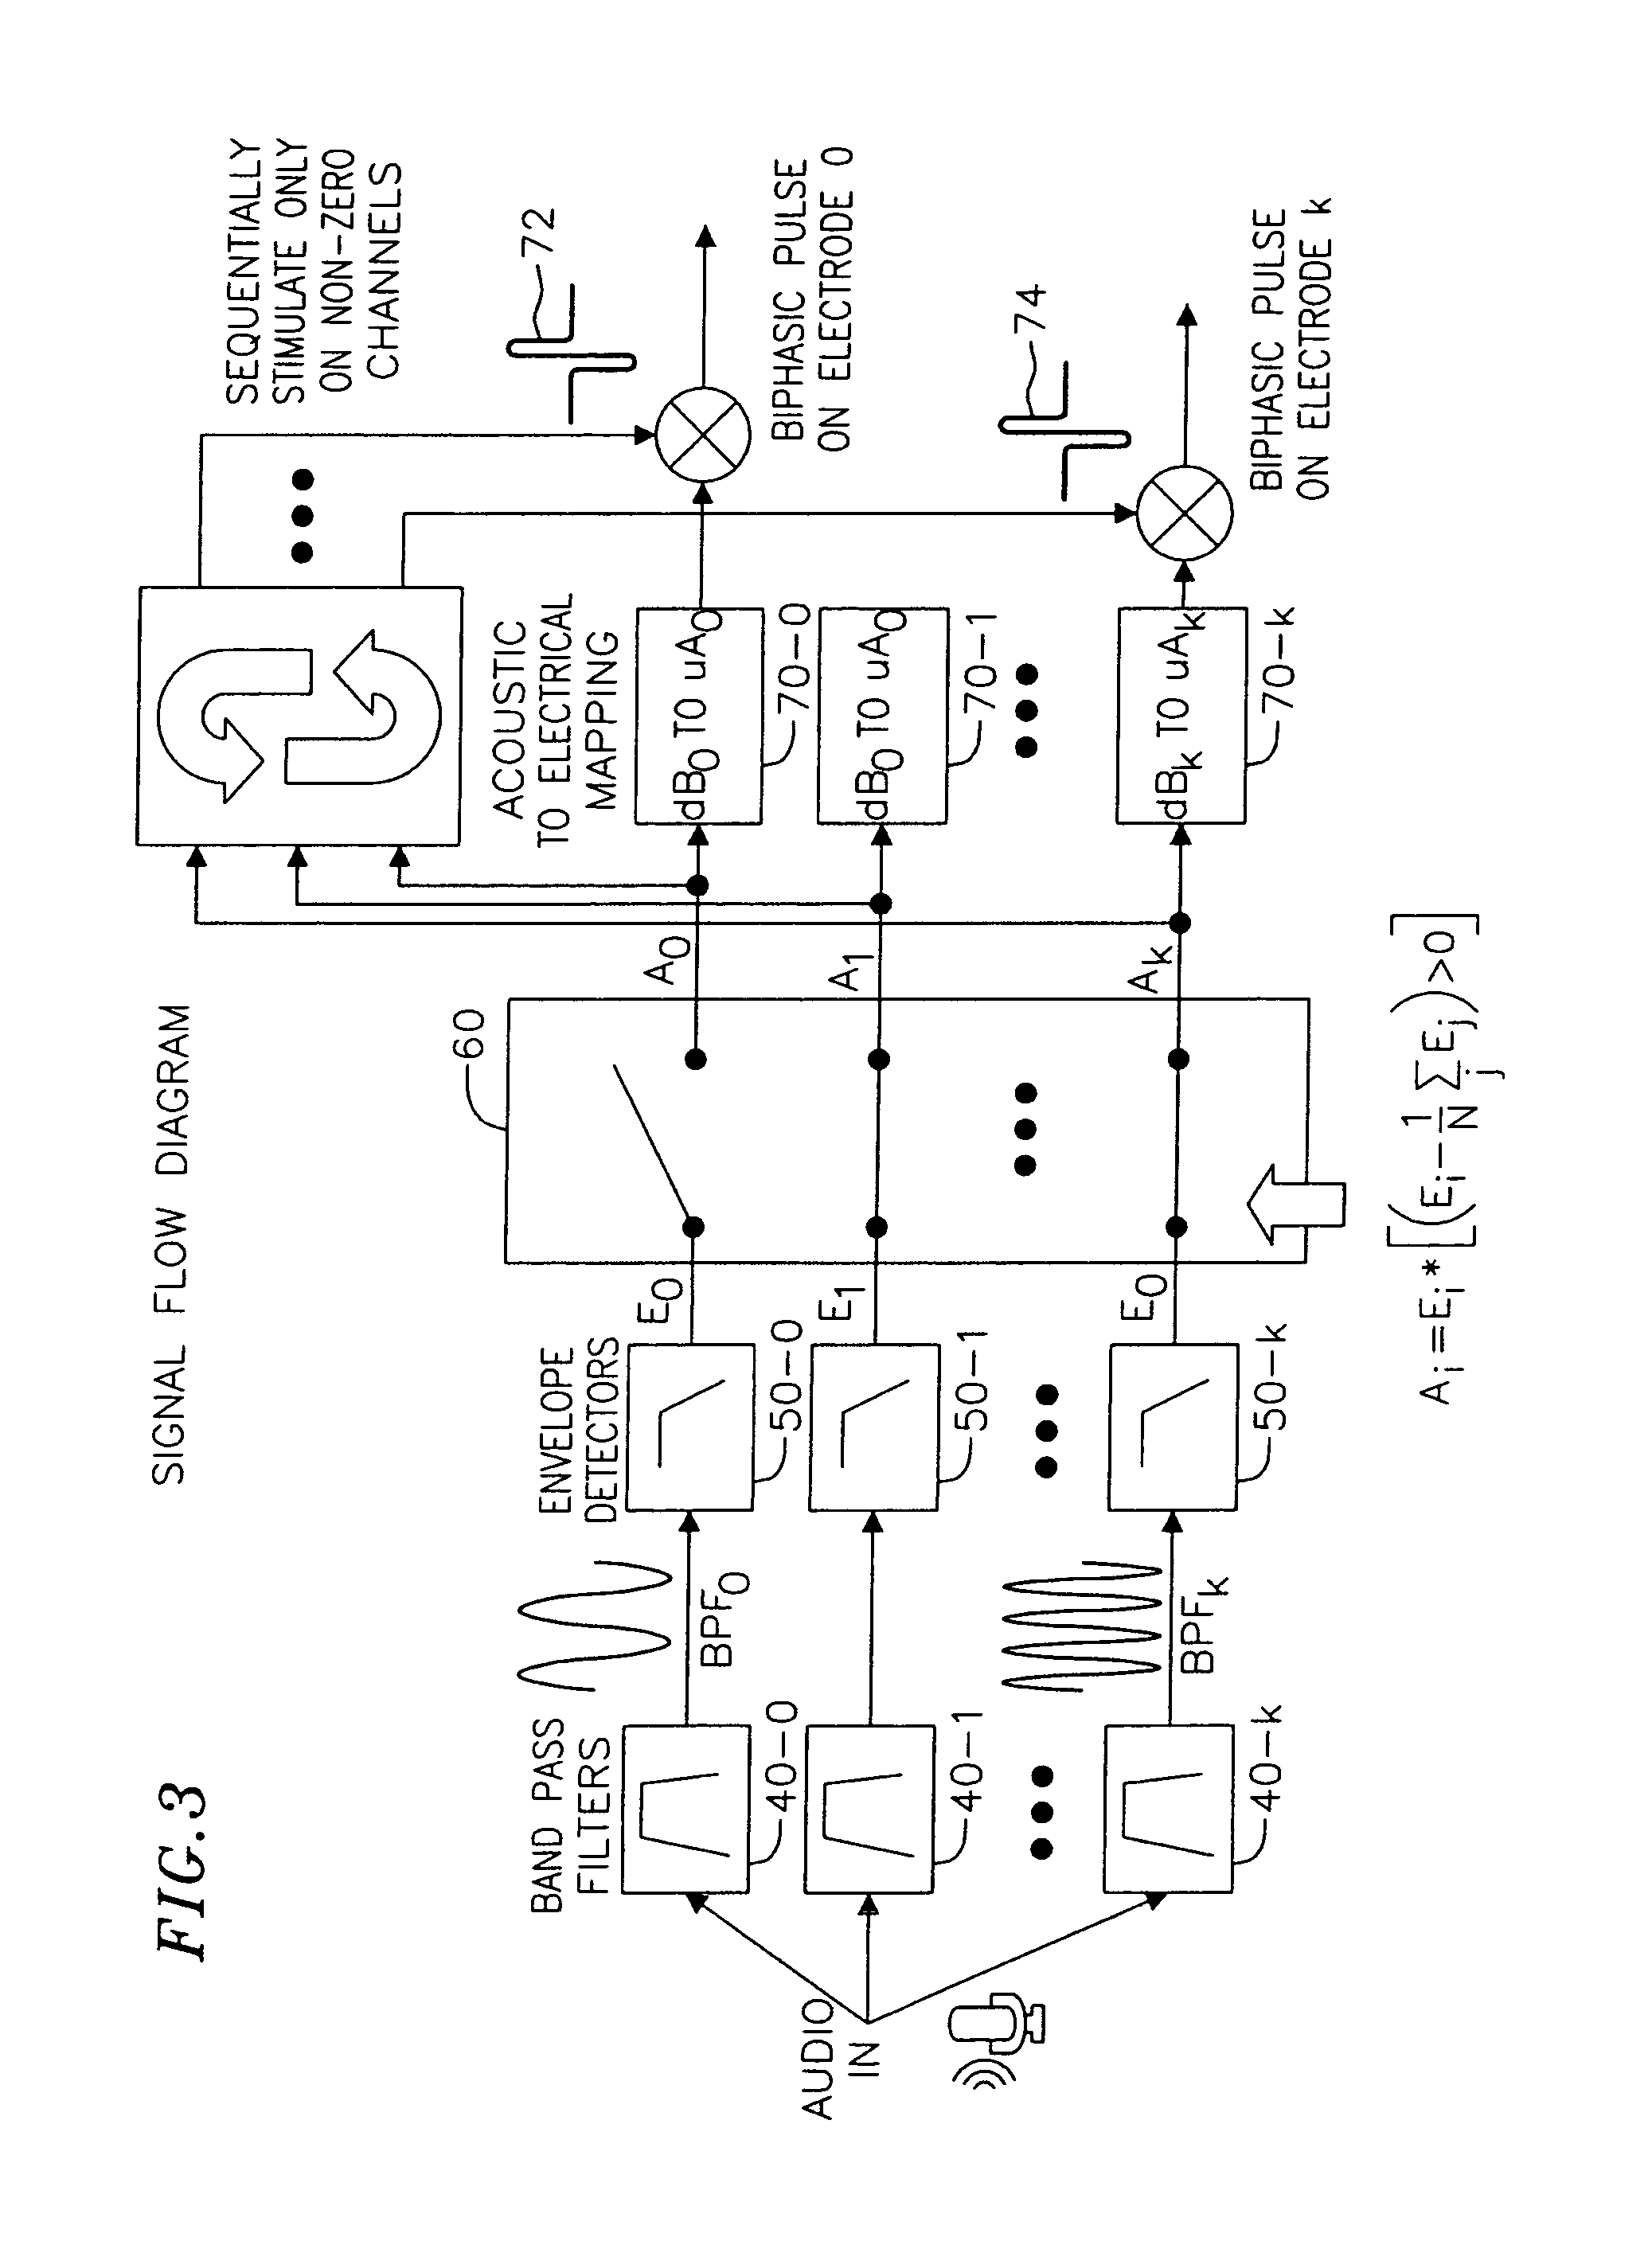 Methods and apparatus for cochlear implant signal processing